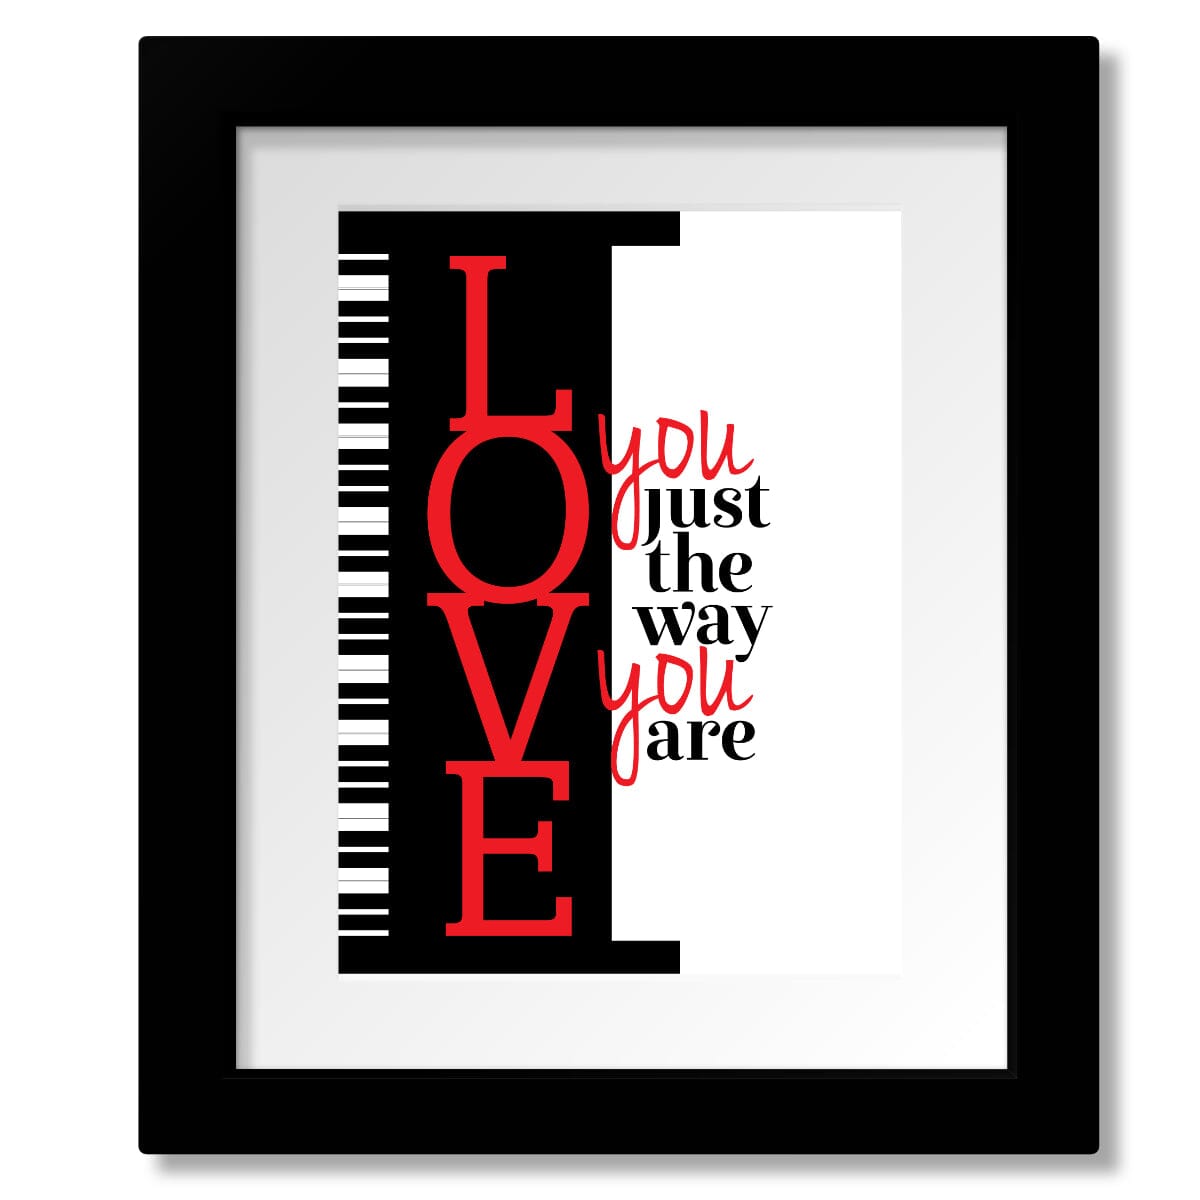 I Love You Just the Way You Are by Billy Joel - Lyrics Art Song Lyrics Art Song Lyrics Art 8x10 Framed and Matted Print 